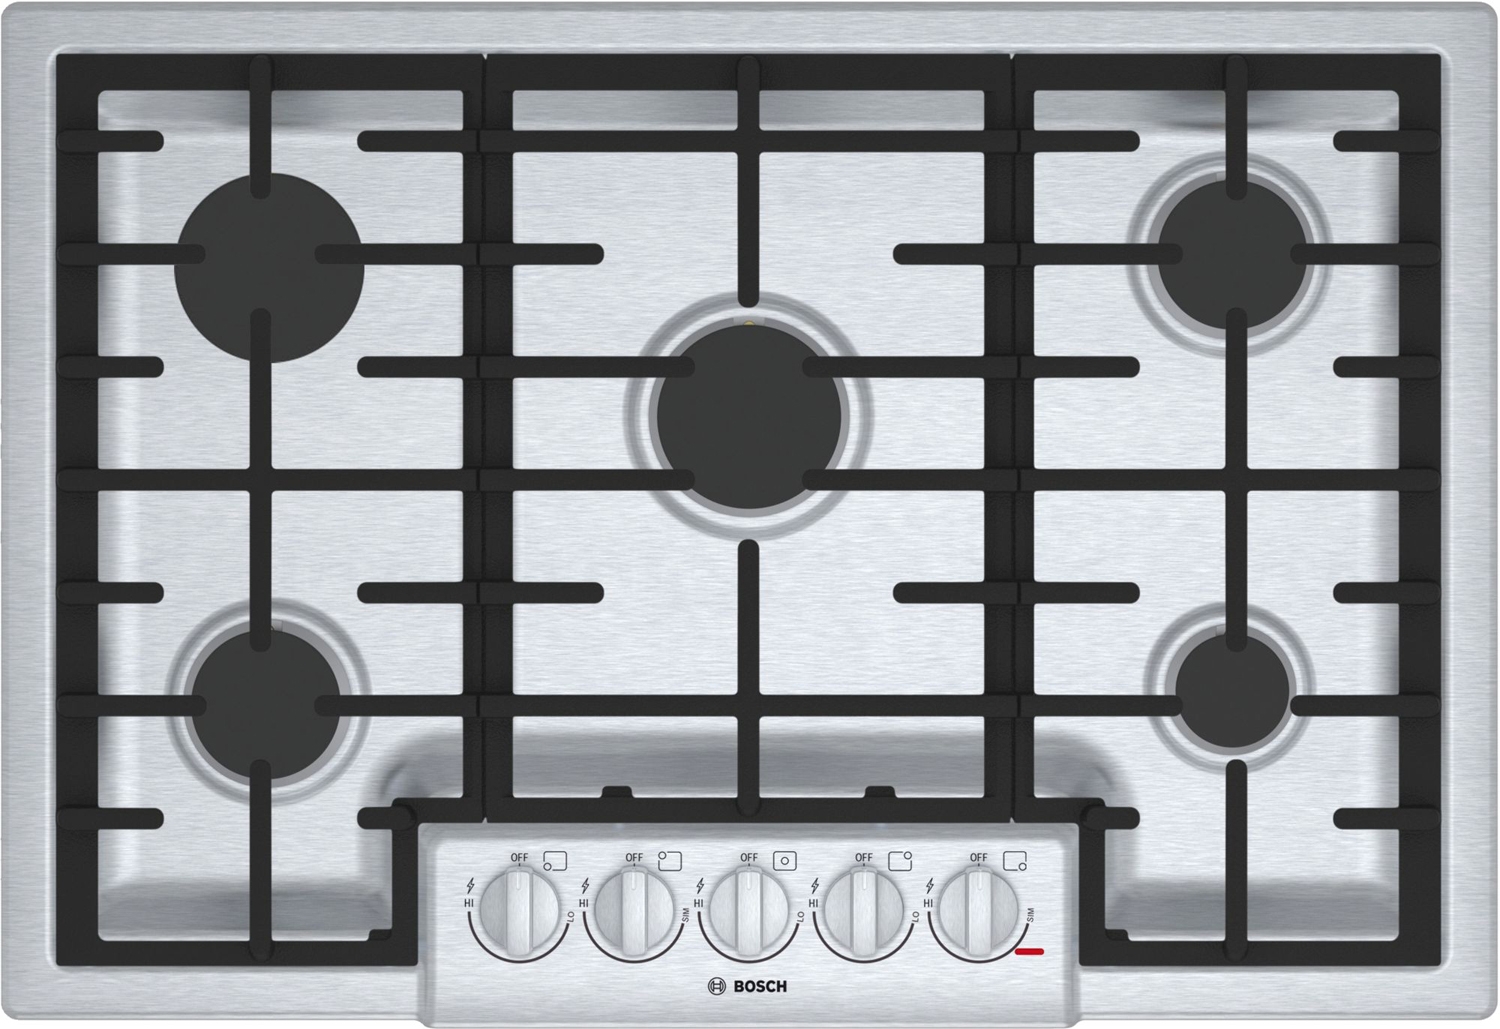 Bosch 800 Series 30" Stainless Steel Gas Cooktop-NGM8056UC